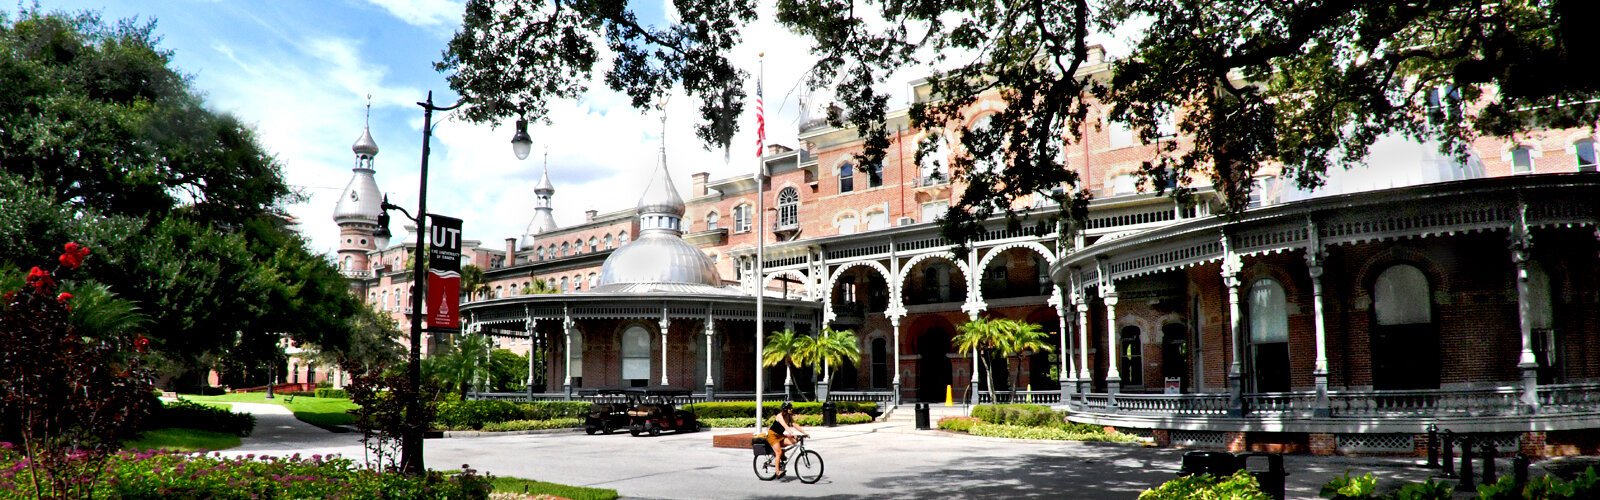 Plant Hall, the 19th century building on the University of Tampa campus housing the Henry B. Plant Museum, is the former Tampa Bay Hotel and a designated National Historic Landmark.